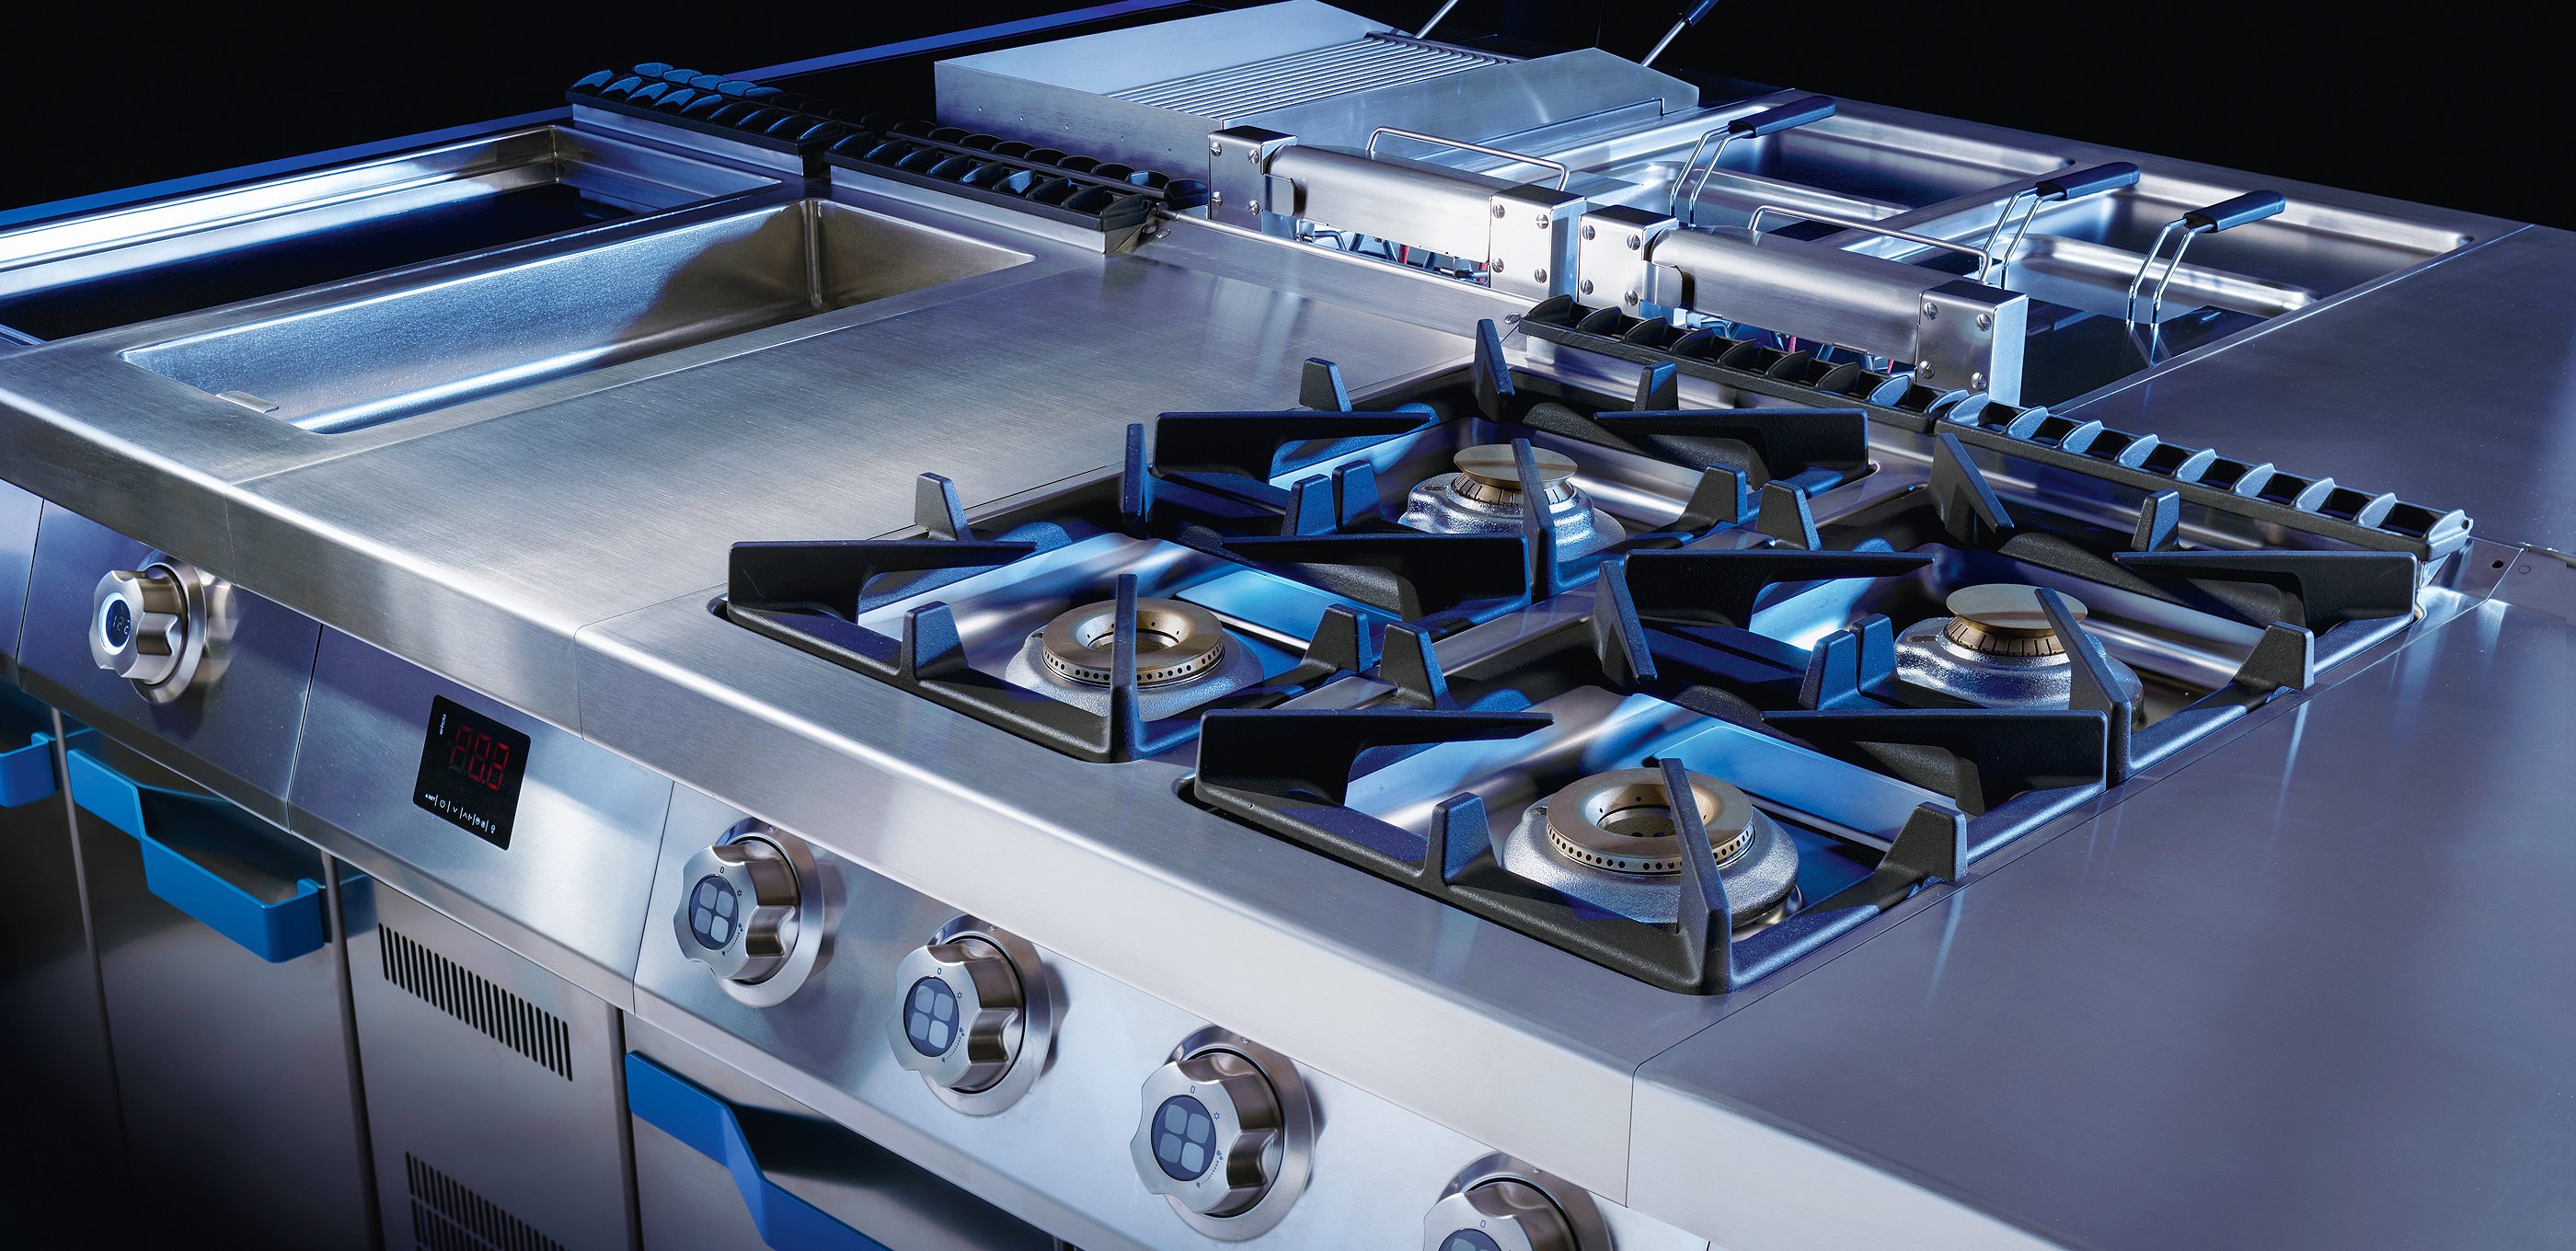 Professional equipment for the food sector